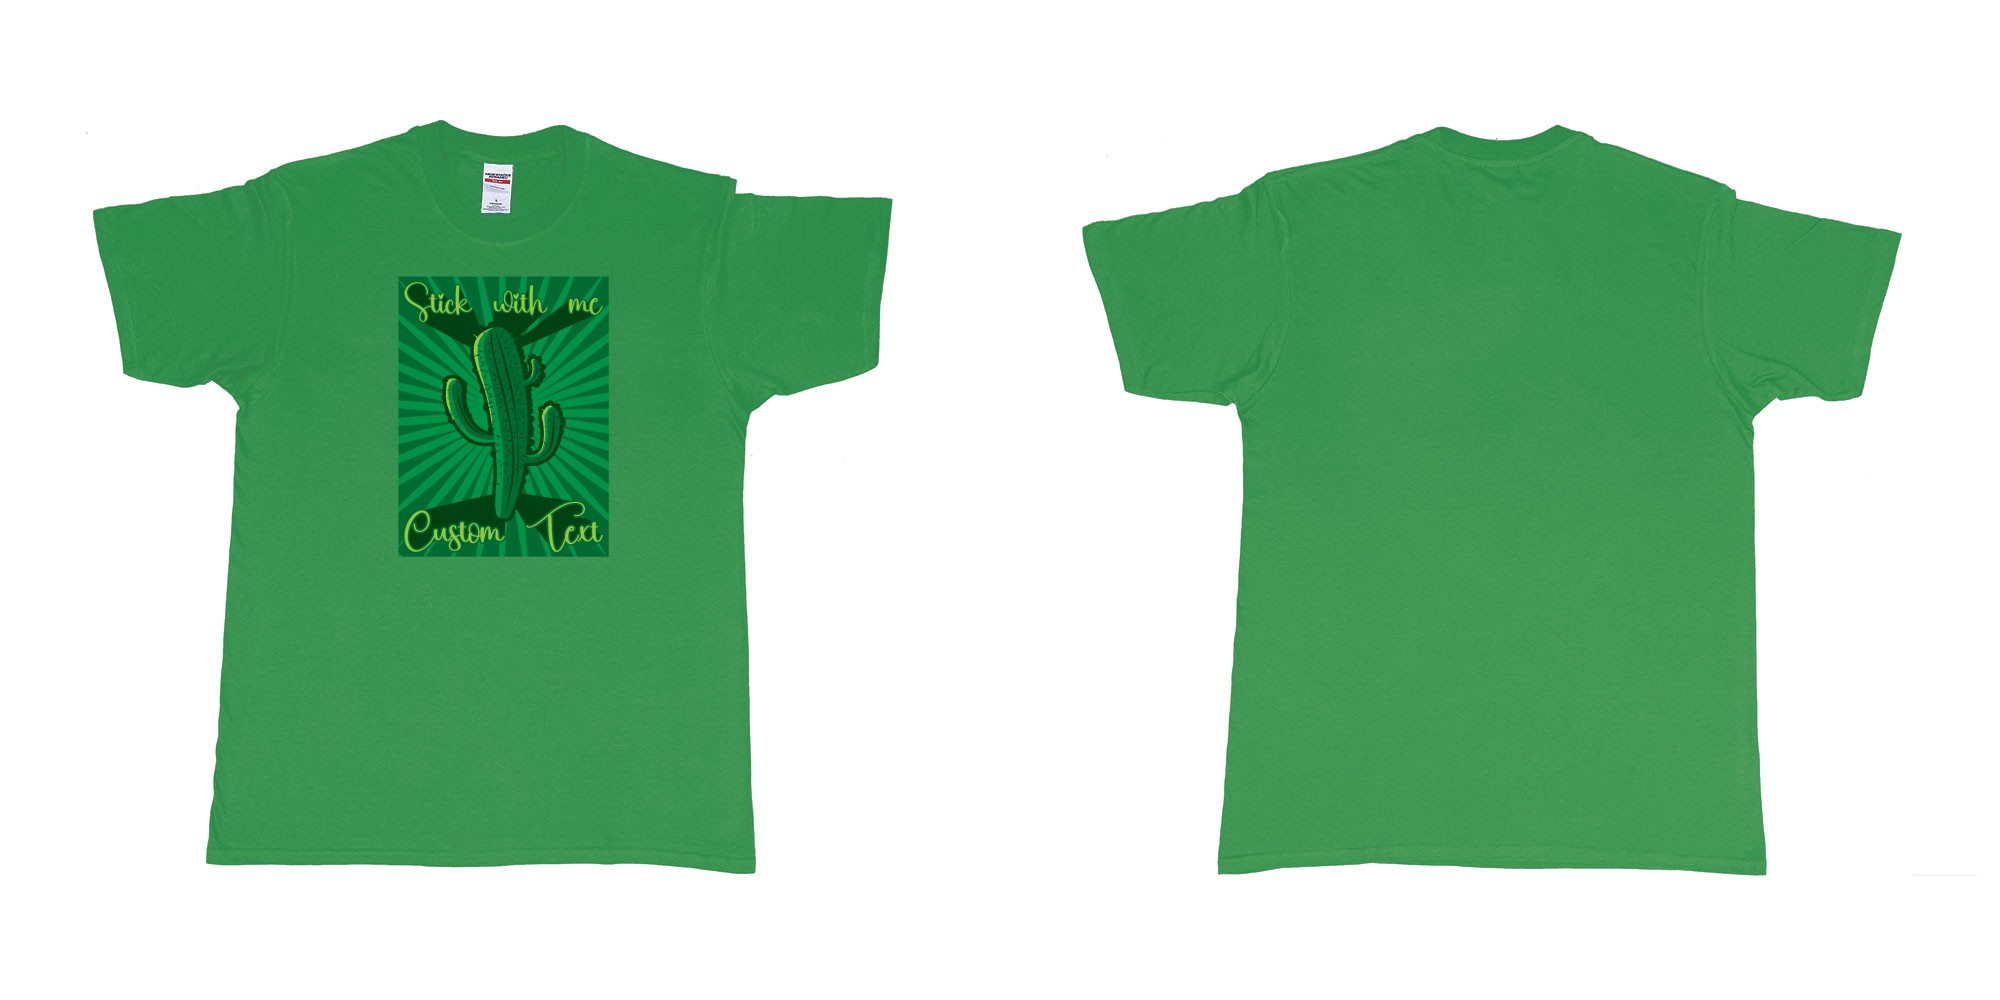 Custom tshirt design cactus stick with me in fabric color irish-green choice your own text made in Bali by The Pirate Way